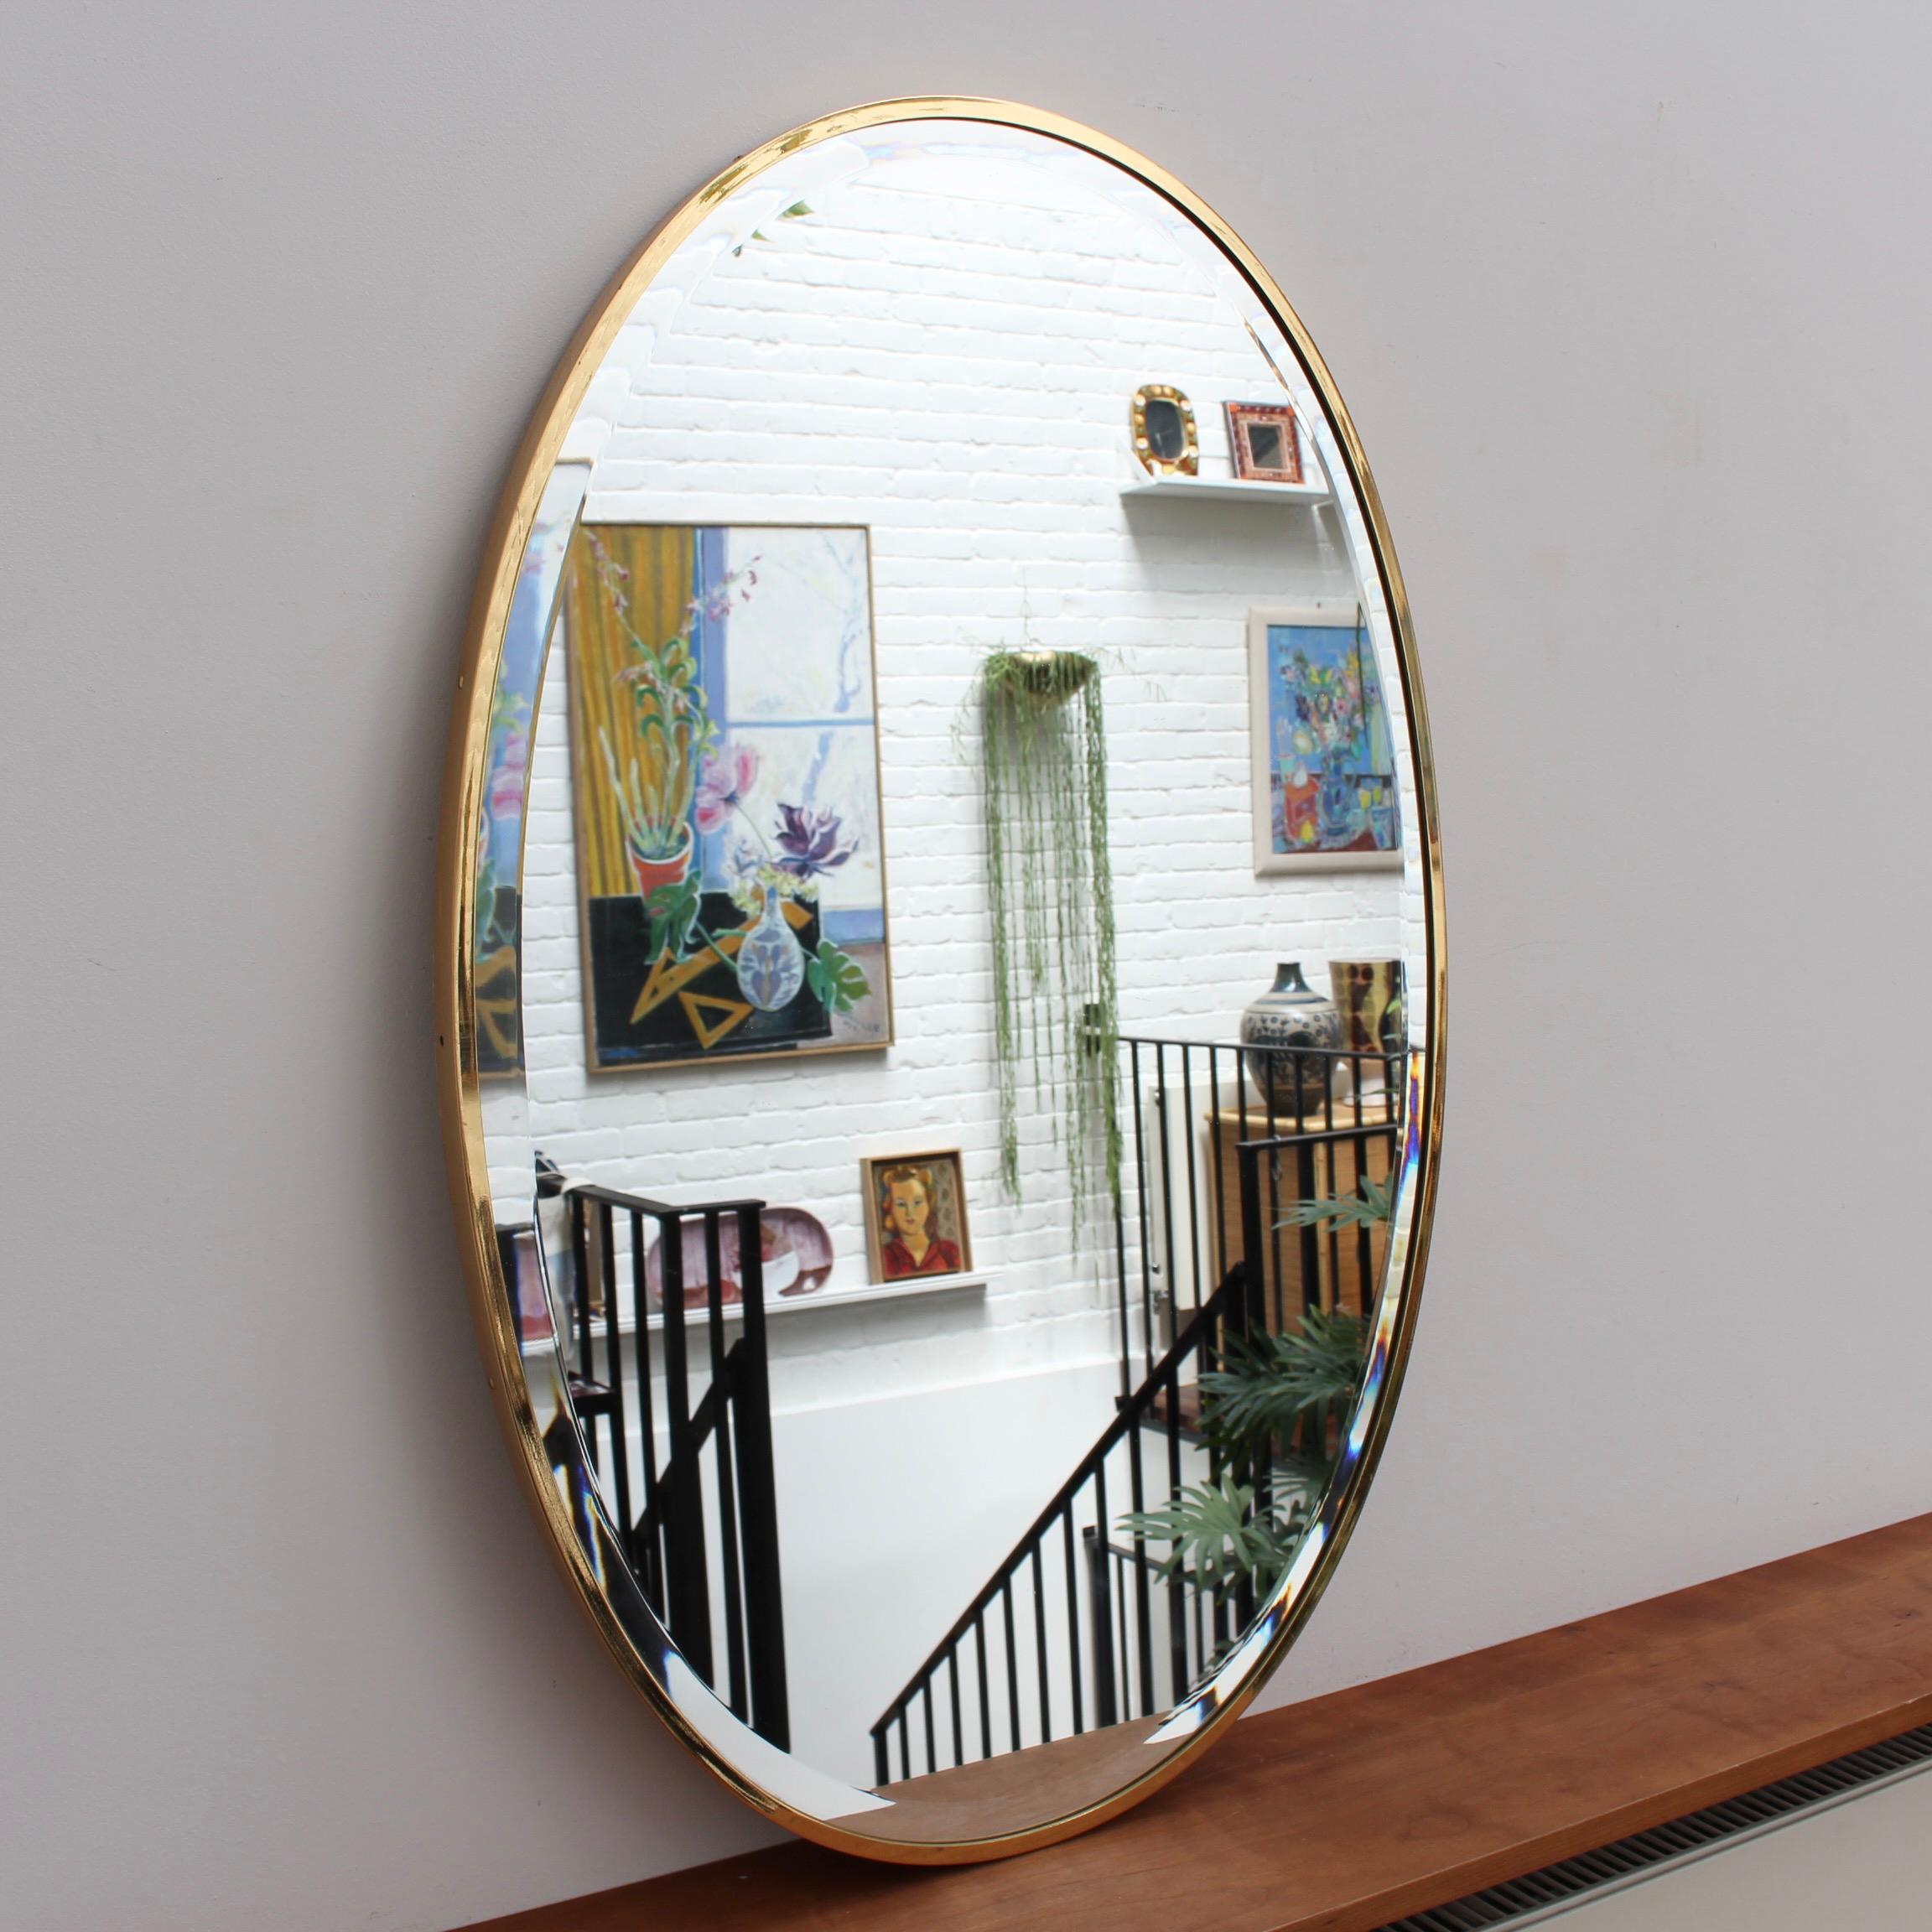 Mid-century Italian wall mirror with brass frame, circa 1950s. The bevelled mirror is oval in shape and very smart with irresistible durability. The visual impression is elegant and very distinctive in a modern Gio Ponti style. The mirror is in very